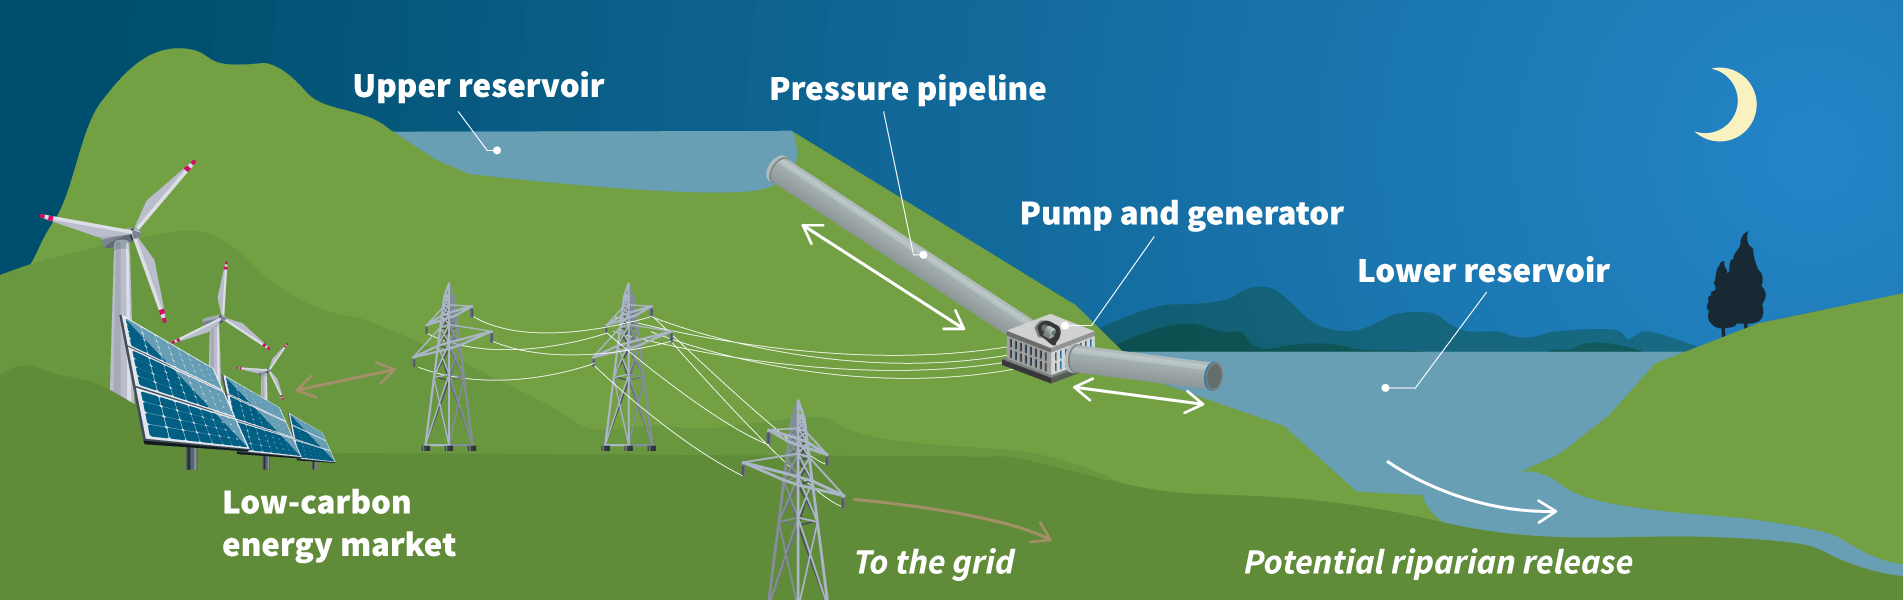 Diagram showing the process for pumped storage hydropower.